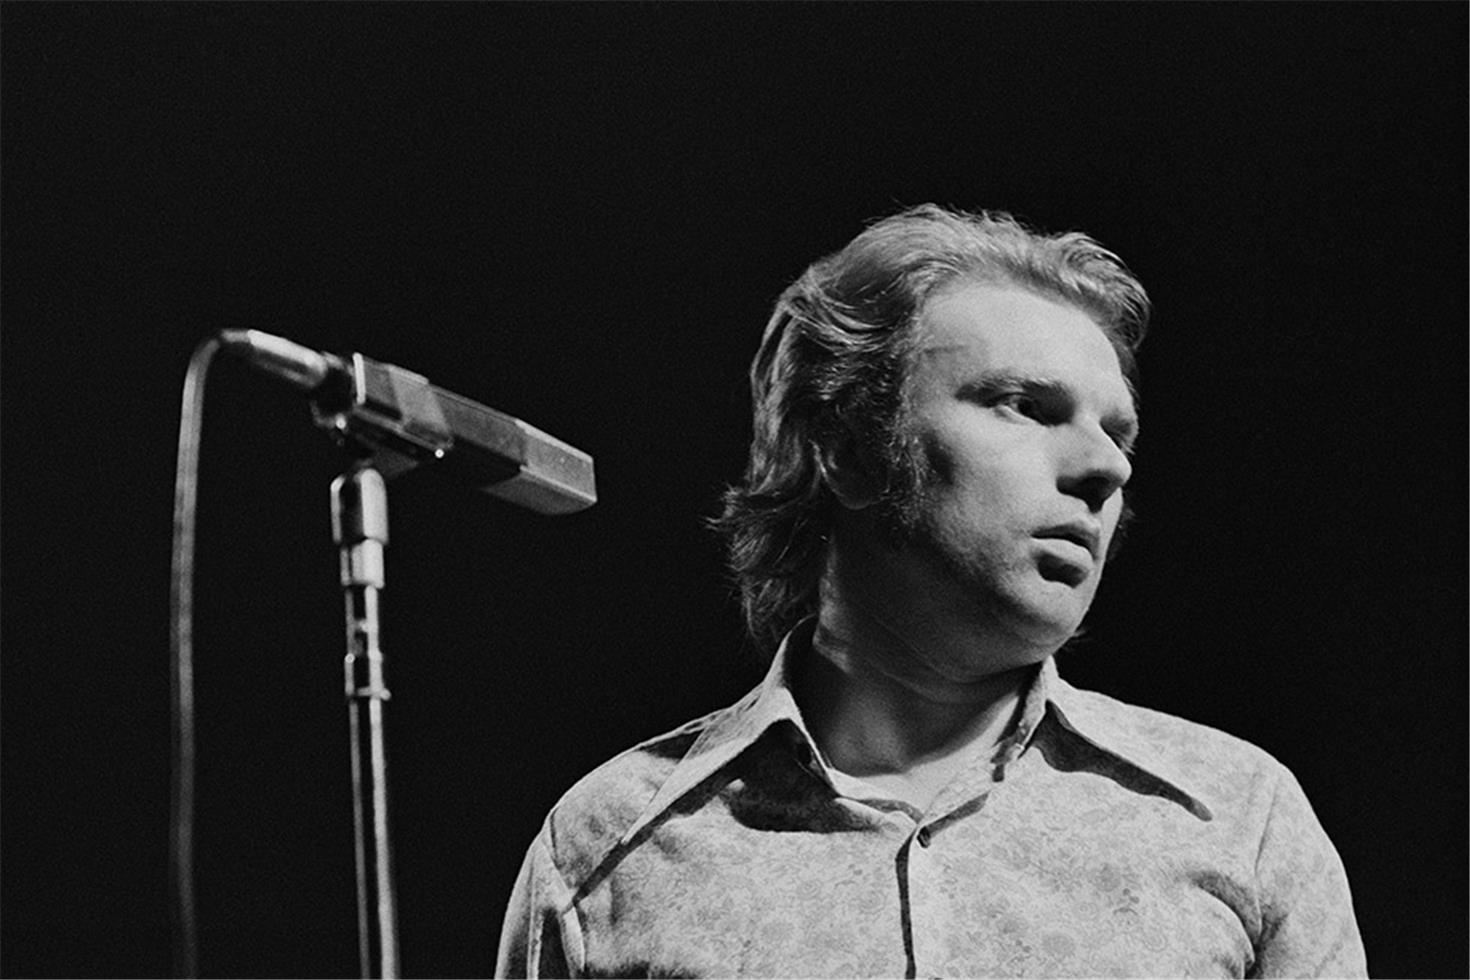 SONG 1. "AND IT STONED ME" - VAN MORRISON